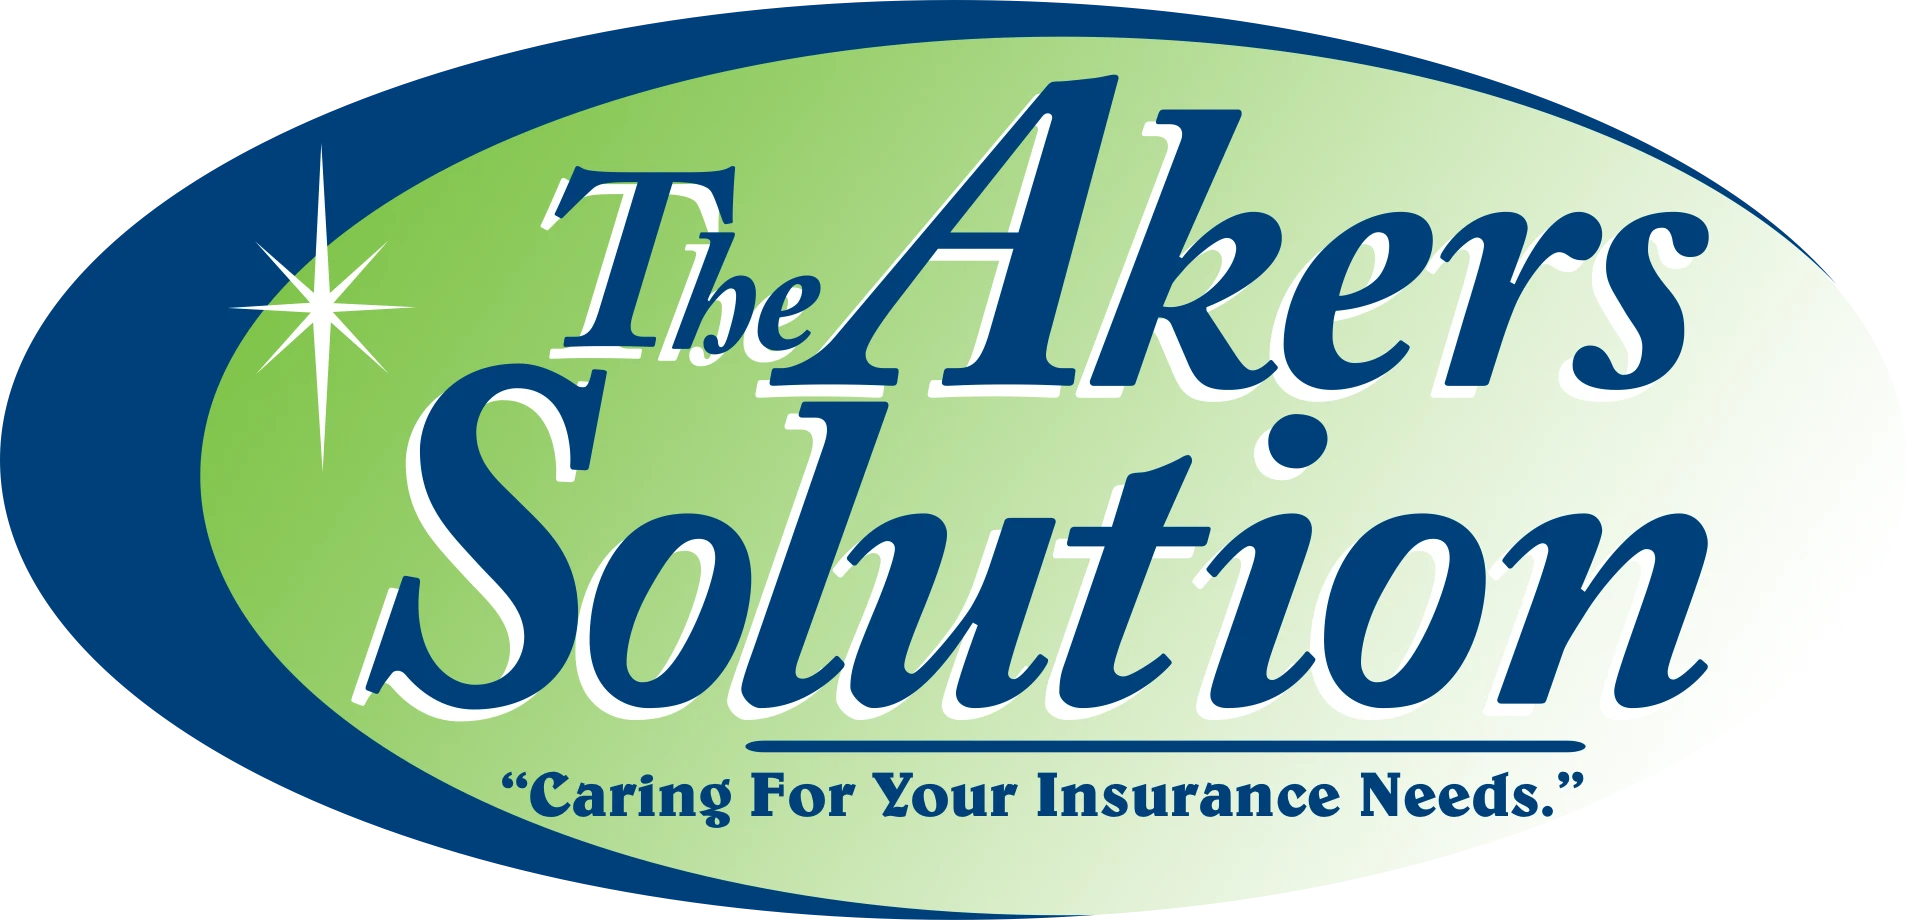 The Akers Solution logo with tagline